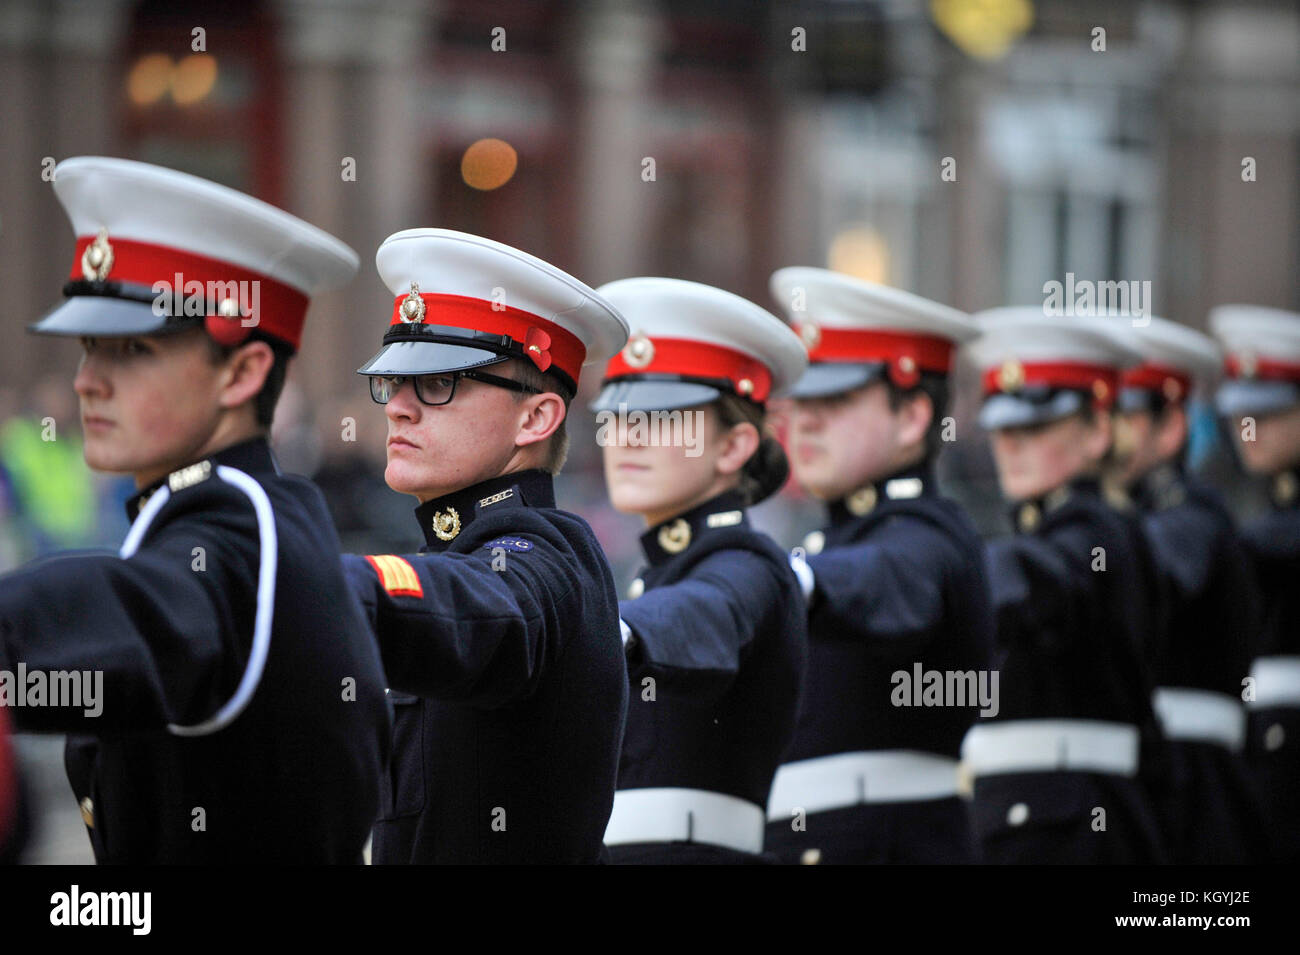 London, UK. 11th Nov, 2017. Cadets line up outside St. Paul's Cathedral during The Lord Mayor's Show, the oldest and grandest civic procession in the world. For over 800 years, the newly elected Lord Mayor of London makes his or her way from the City to distant Westminster to swear loyalty to the Crown. Credit: Stephen Chung/Alamy Live News Stock Photo